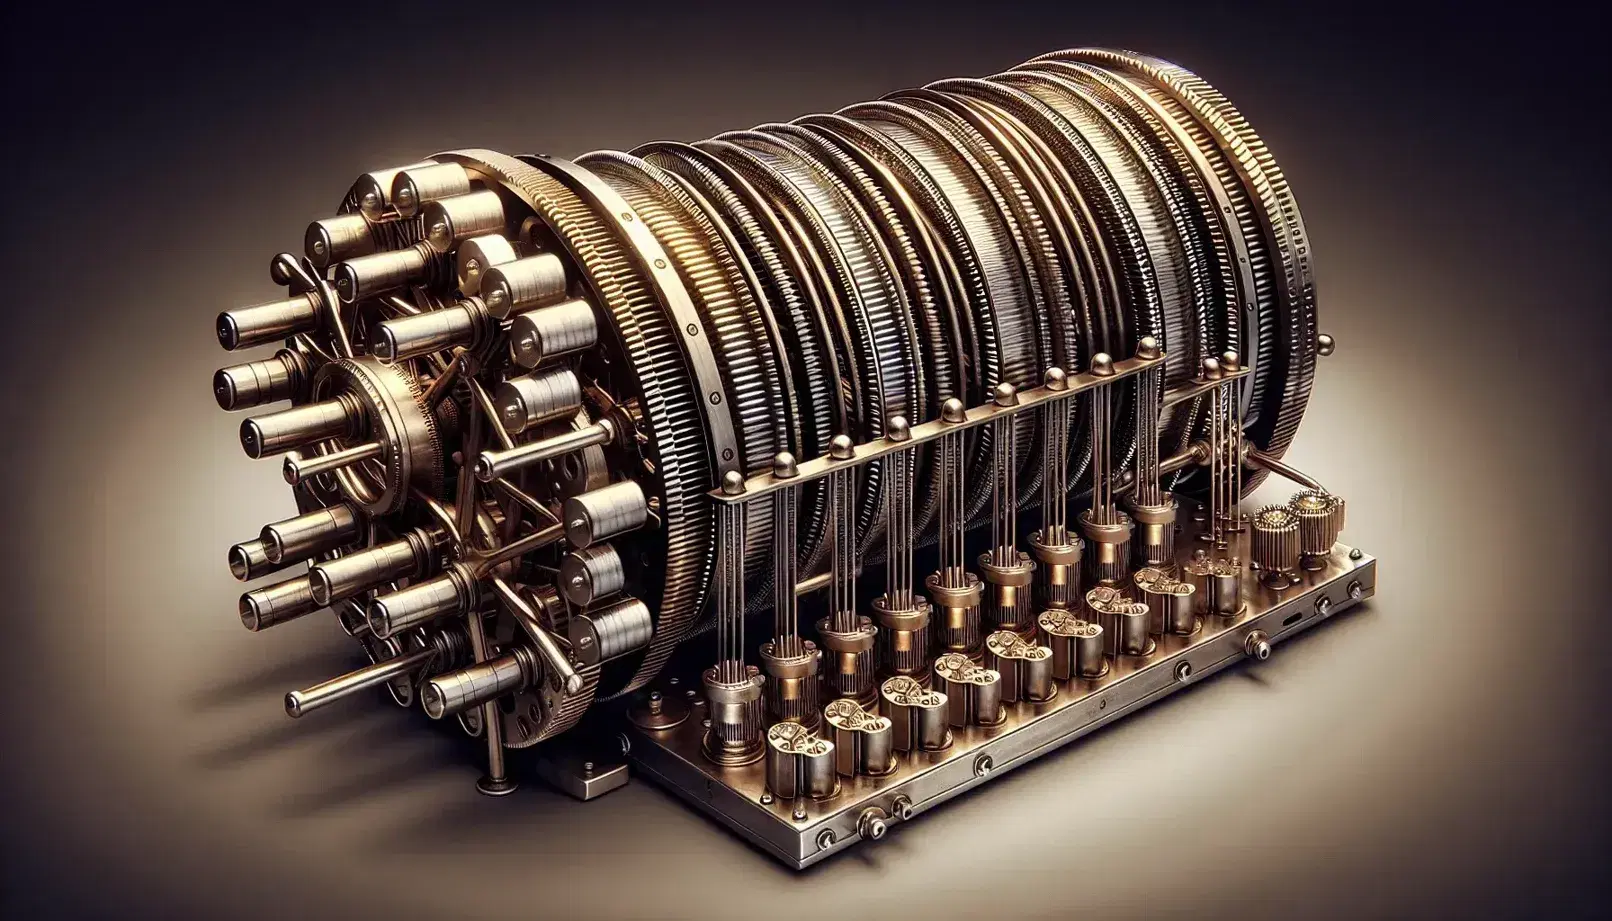 Vintage mechanical calculator with metal drum, horizontal bands, square plates, gold gears, colored levers and knobs on mahogany wood base.